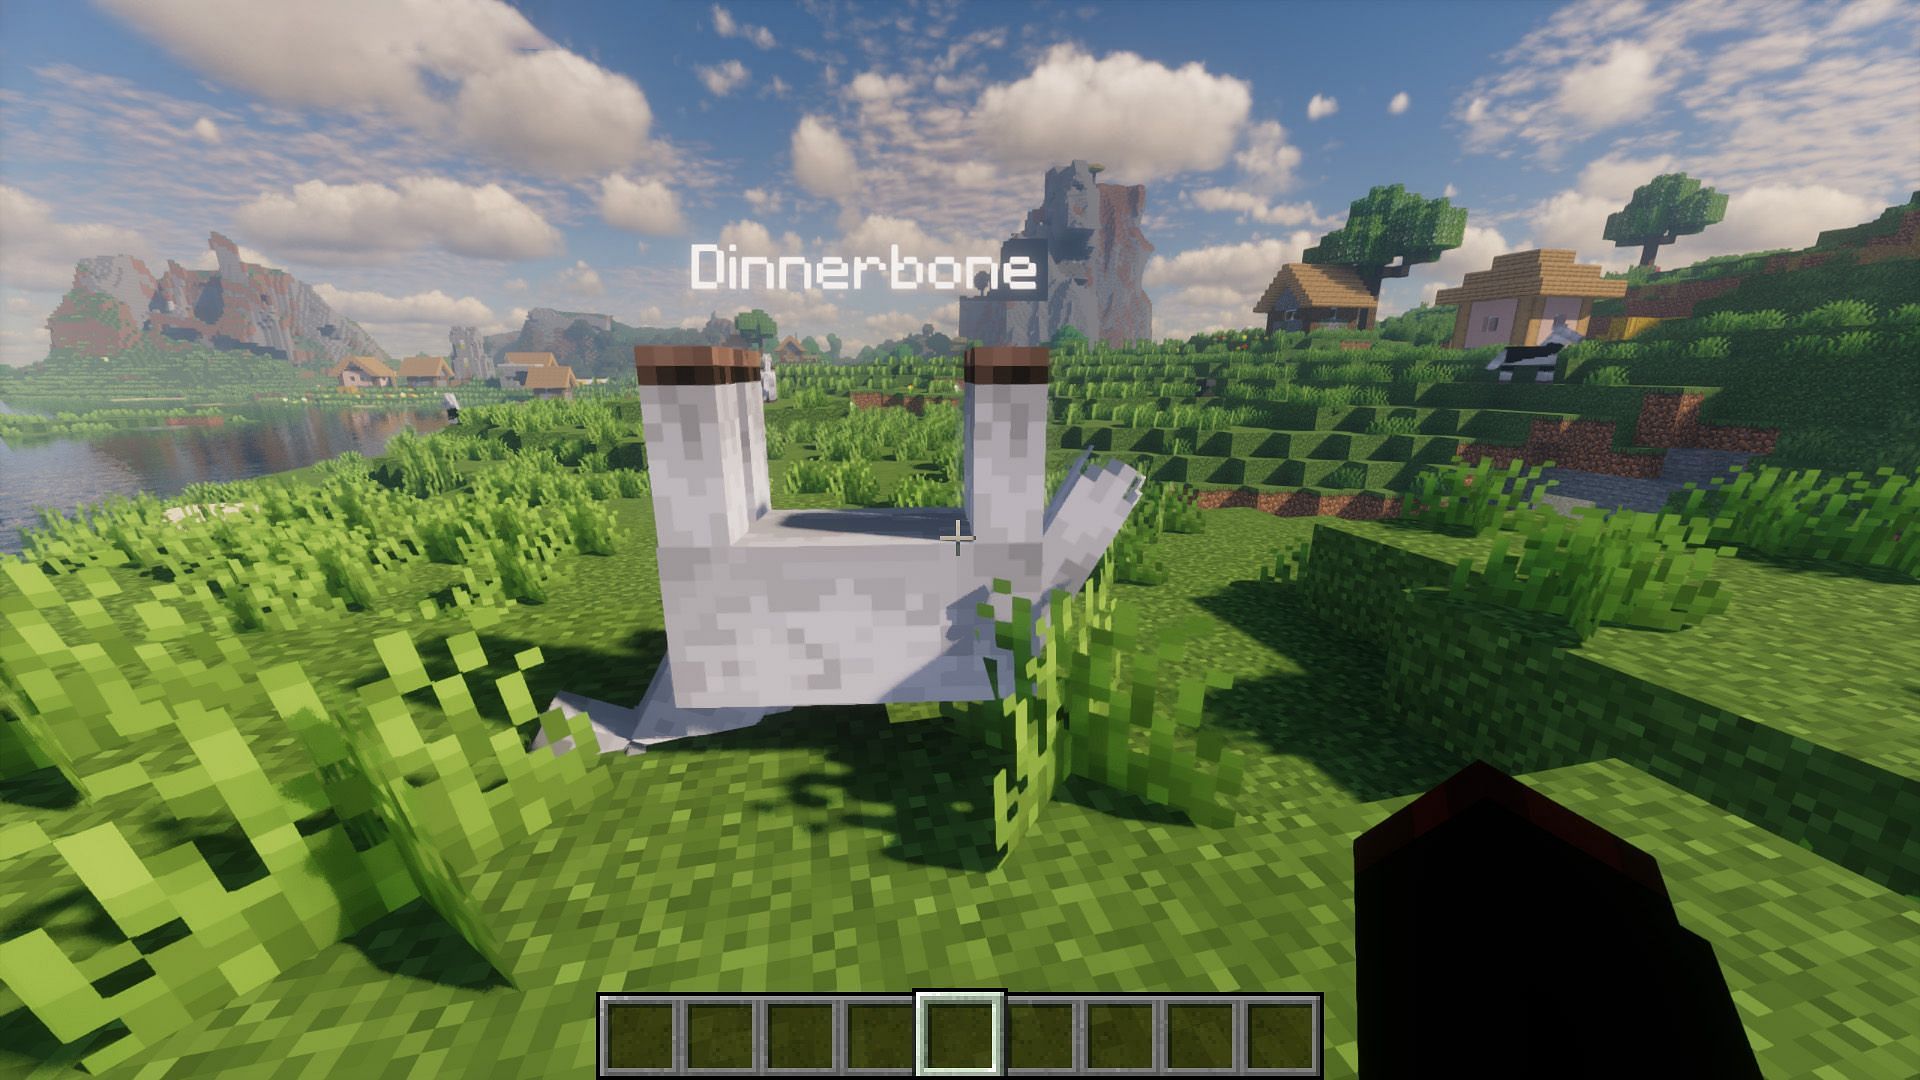 Explore this unique easter egg in Minecraft (Image via Mojang) 